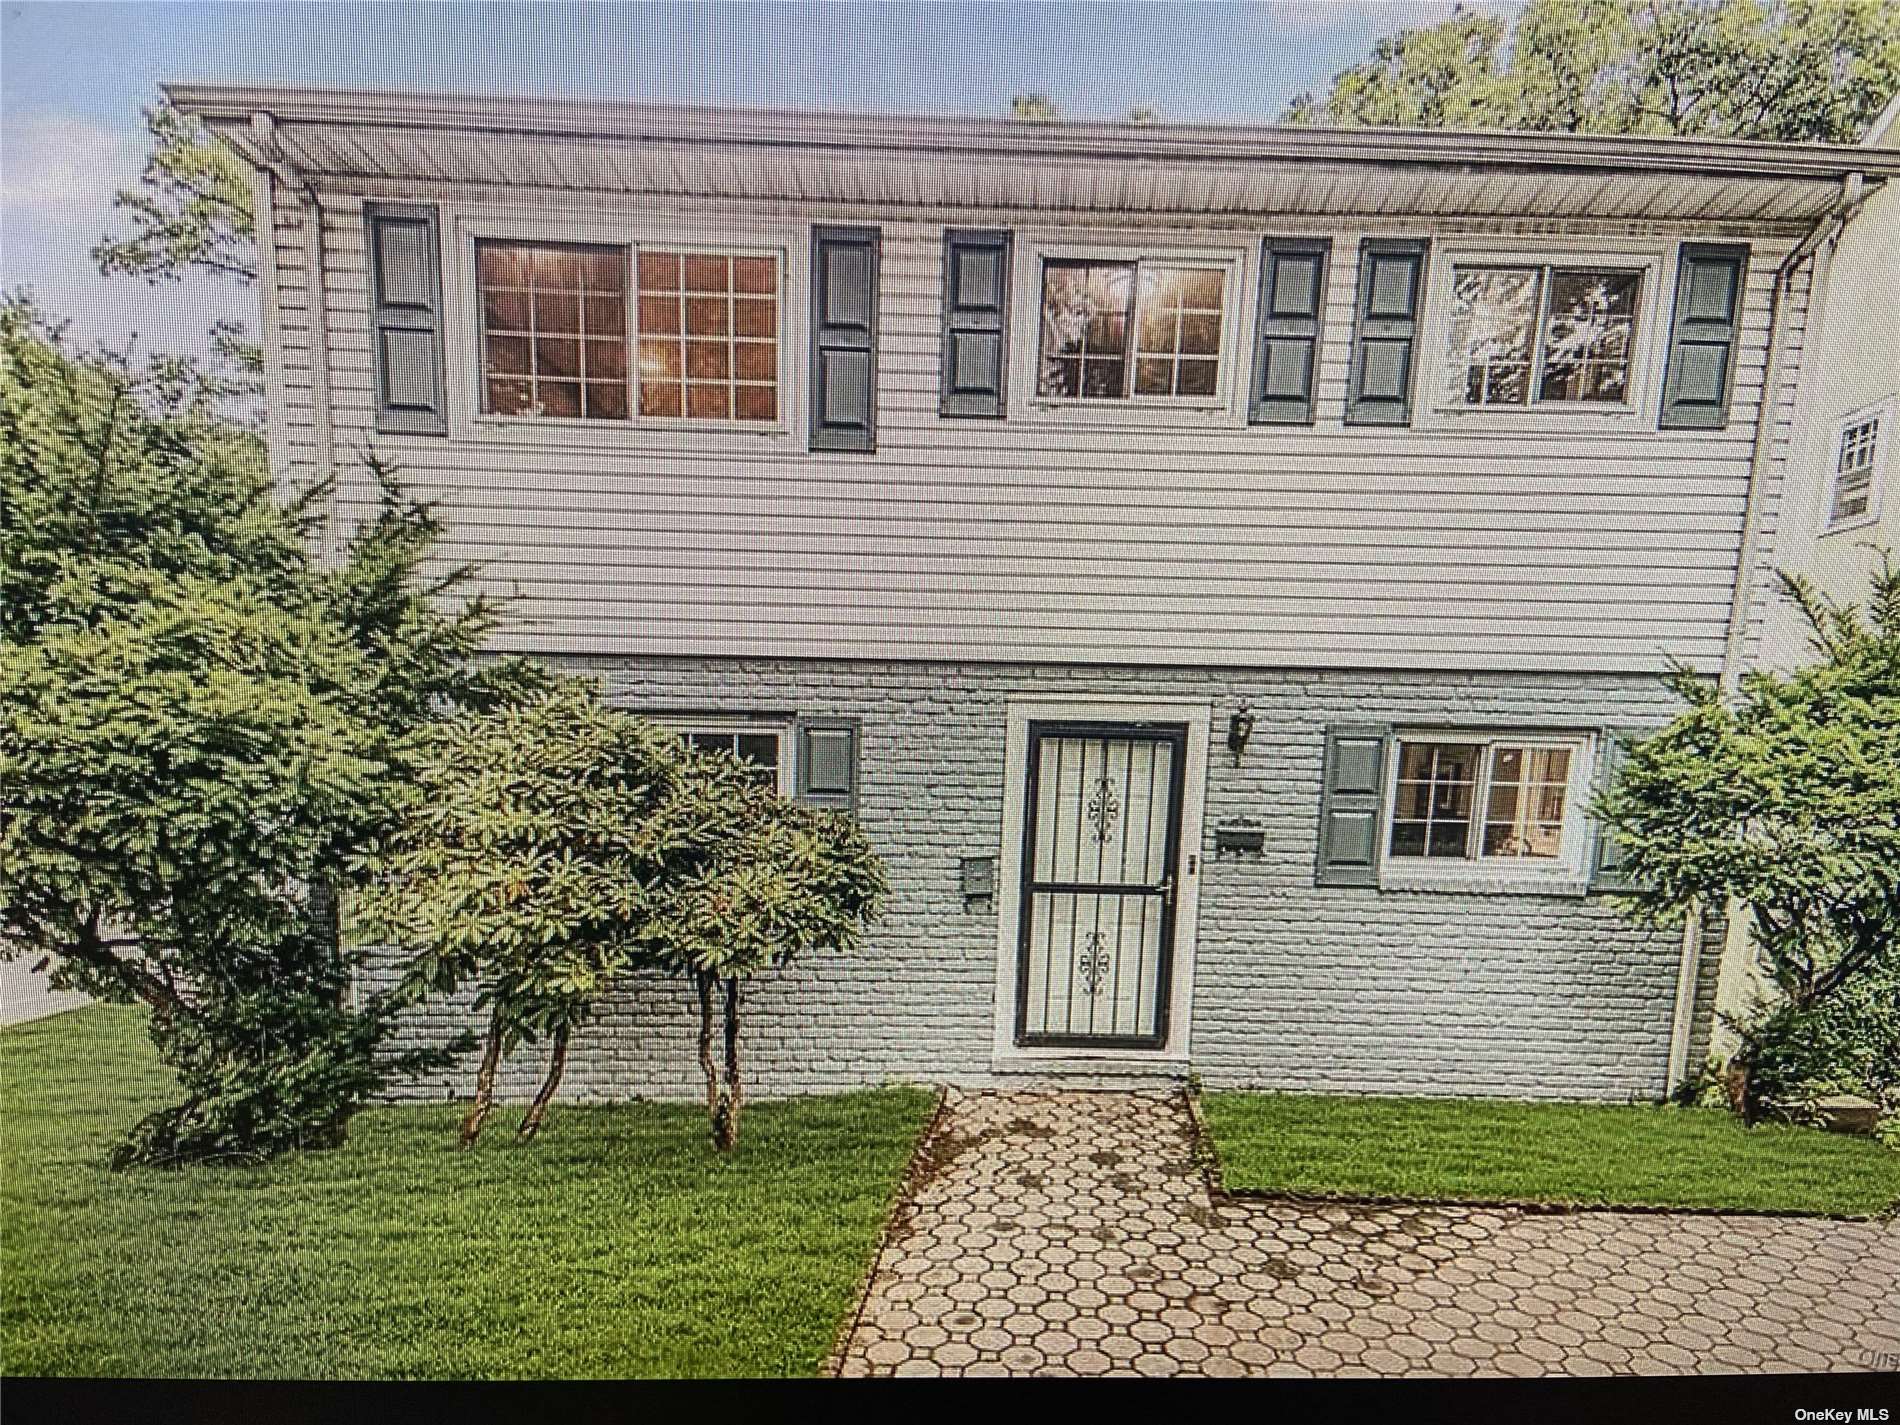 Listing in Mount Vernon, NY